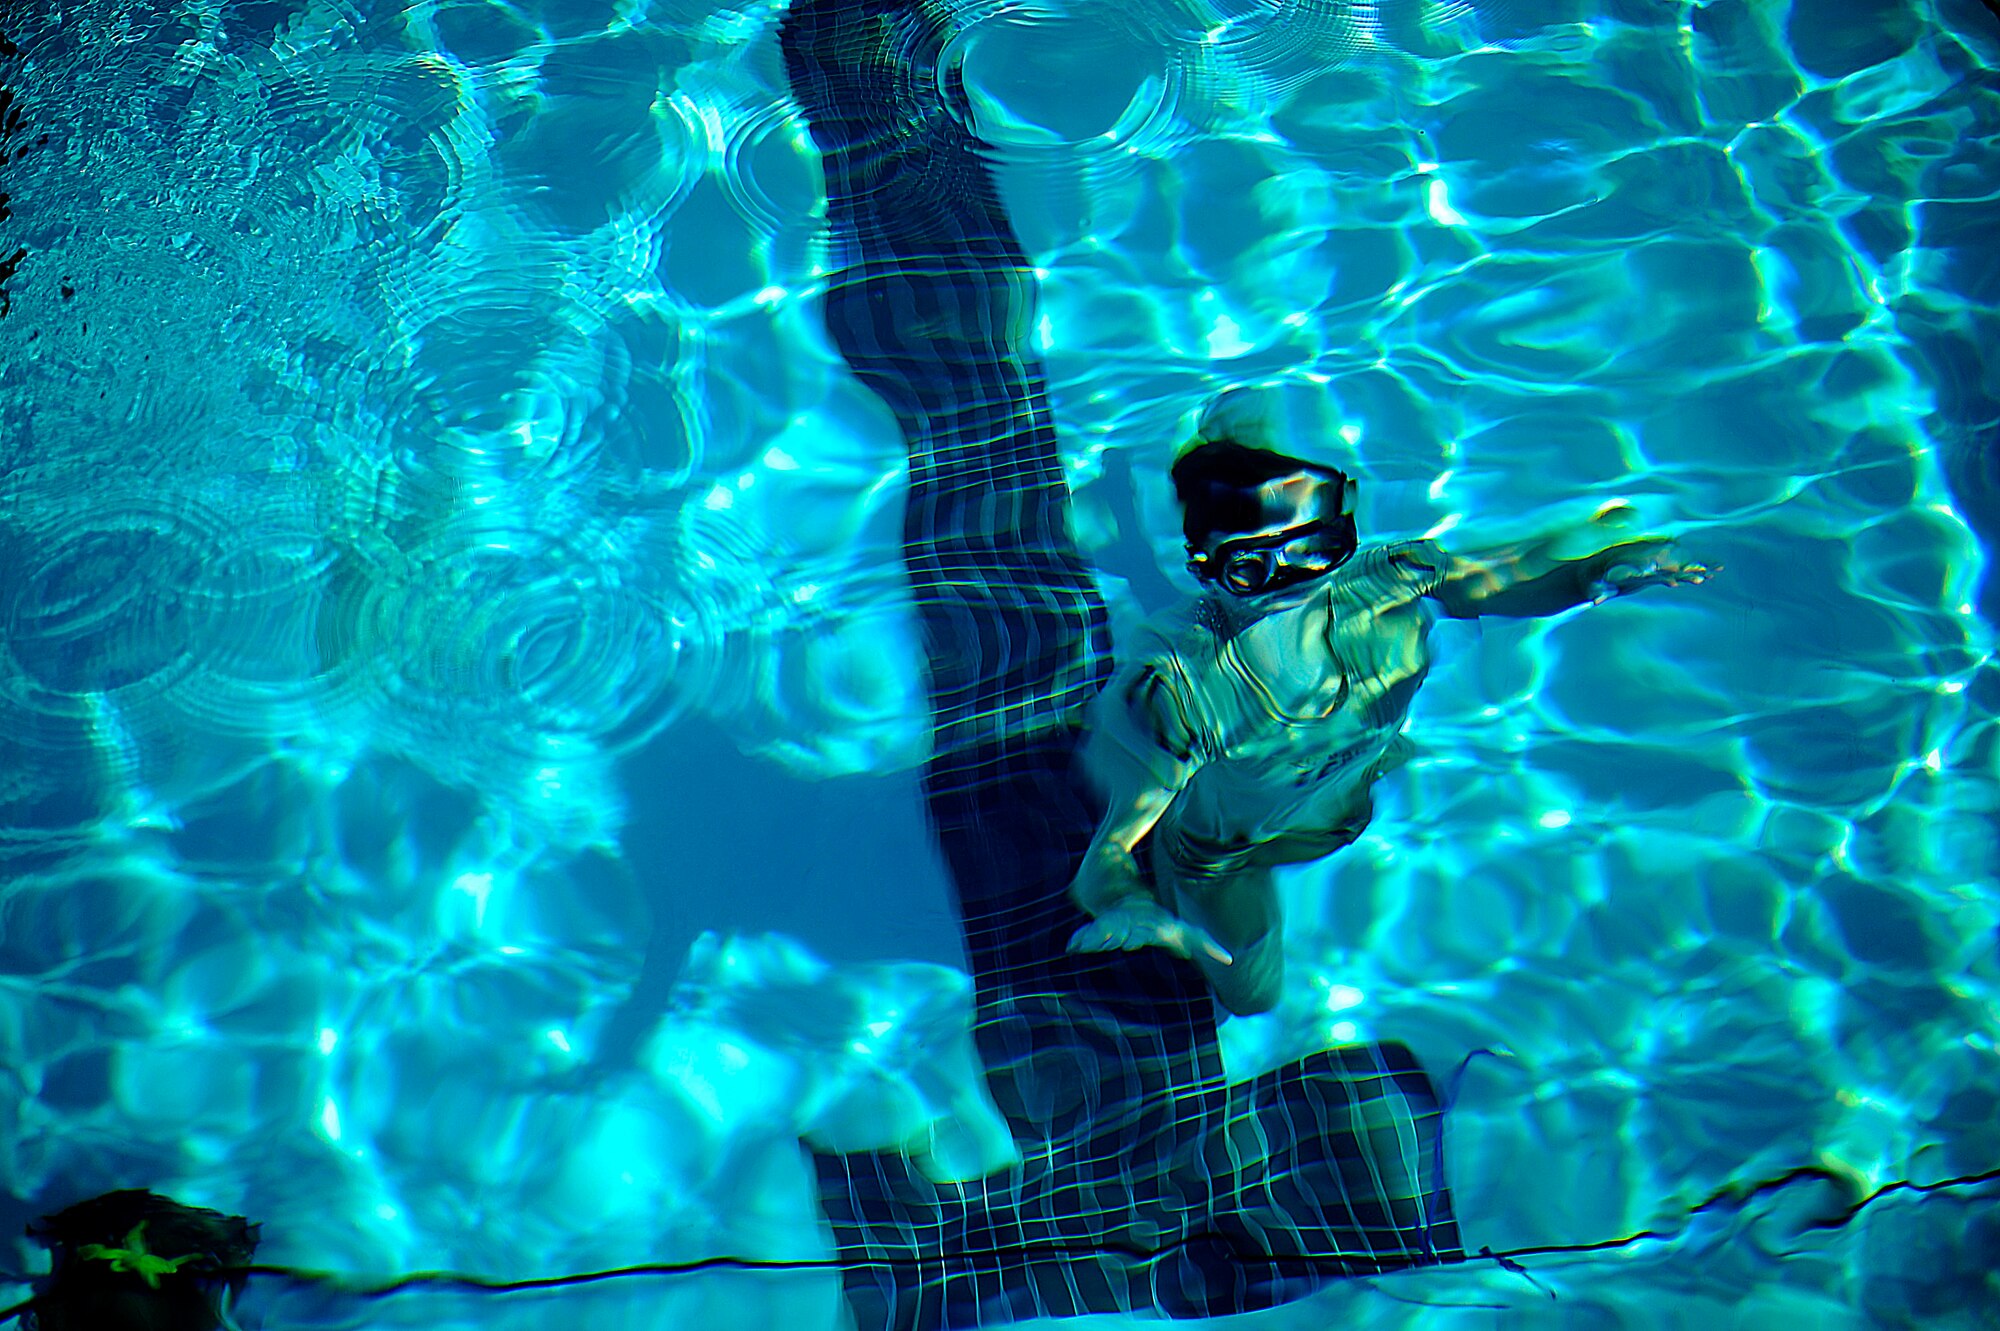 A U.S. Air Force member from the Special Tactics Training Squadron, Air Force Special Operations Command, Hurlburt Field, Fla., looks up from the bottom of the pool during pre-scuba training Sept. 21, 2010. (U.S. Air Force Photo by Master Sgt. Russell E Cooley IV/Released)